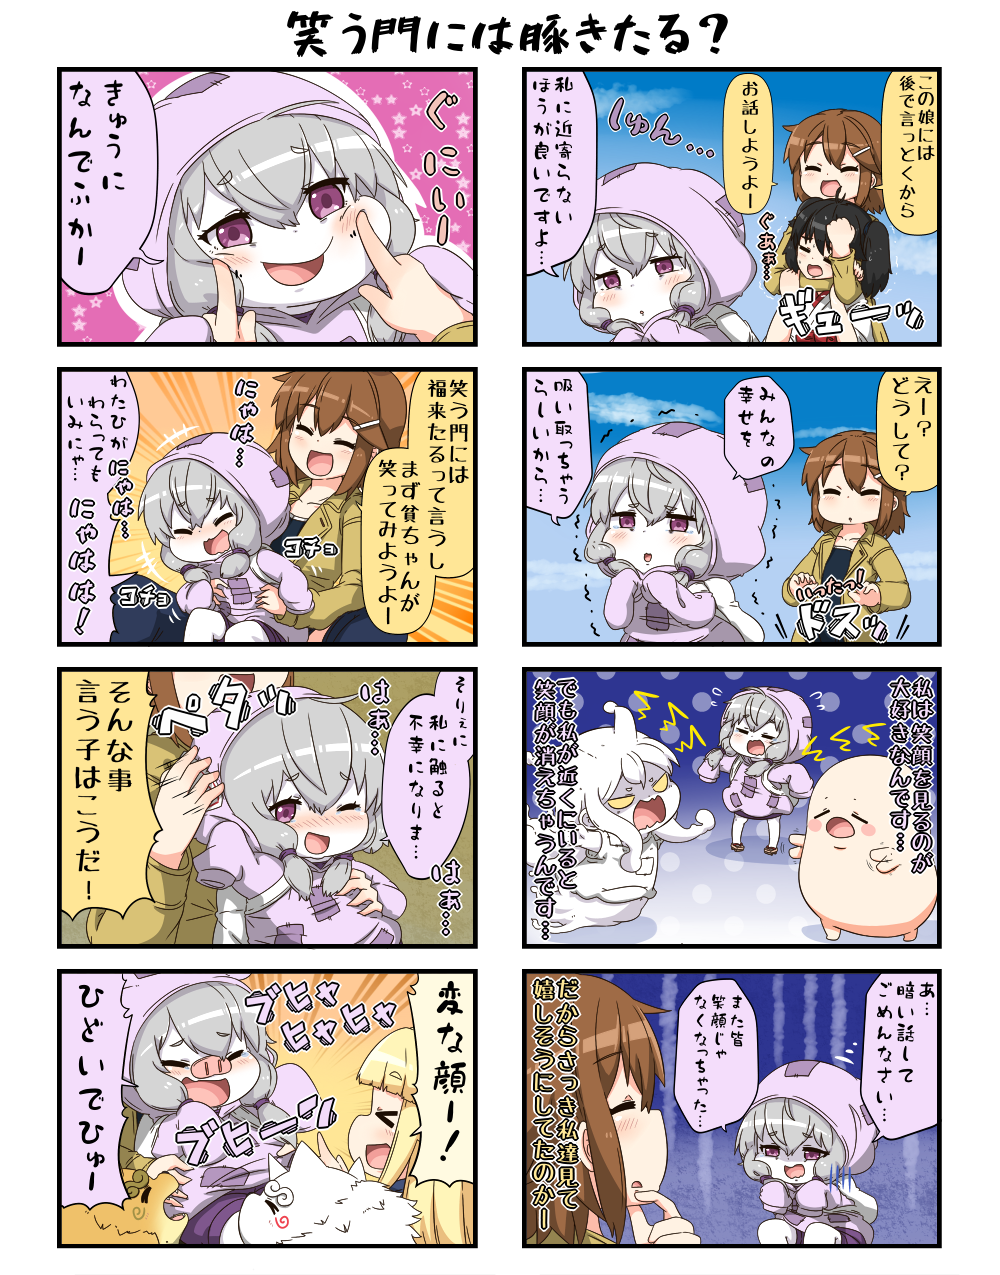 4koma 5girls angry backpack bag bangs binbougami black_hair blonde_hair blunt_bangs blush blush_stickers brown_hair cheek_poking chibi choke_hold clenched_hands coat comic commentary_request eyebrows_visible_through_hair eyes_closed ghost_tail gloom_(expression) grey_hair hair_between_eyes hair_ornament hairclip hand_on_another's_head hands_up highres hood hood_up hoodie japanese_clothes komainu long_sleeves miko multiple_girls one_eye_closed open_mouth original patches pig_snout pointing poking purple_eyes reiga_mieru shaded_face short_hair sidelocks sleeves_past_wrists smile star strangling tenko_(yuureidoushi_(yuurei6214)) tickling translation_request trembling twintails white_hair wide_sleeves yamaki_mikoto yellow_eyes youkai yuureidoushi_(yuurei6214)